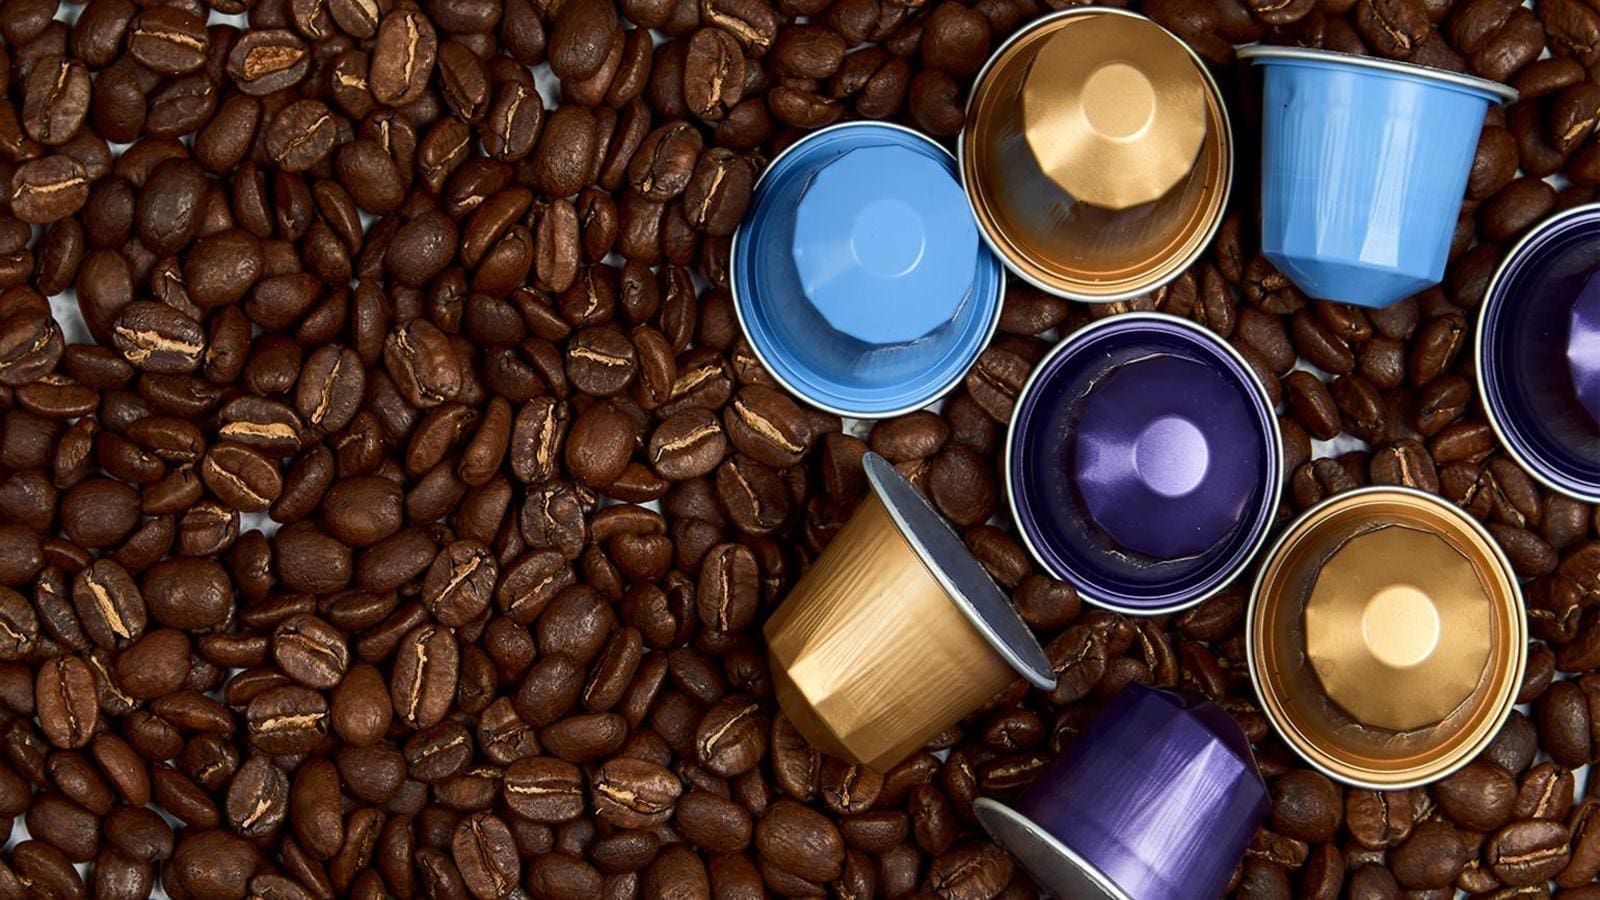 Italian company Hebron Plc invests US$1.8m in production of coffee capsules in Ethiopia